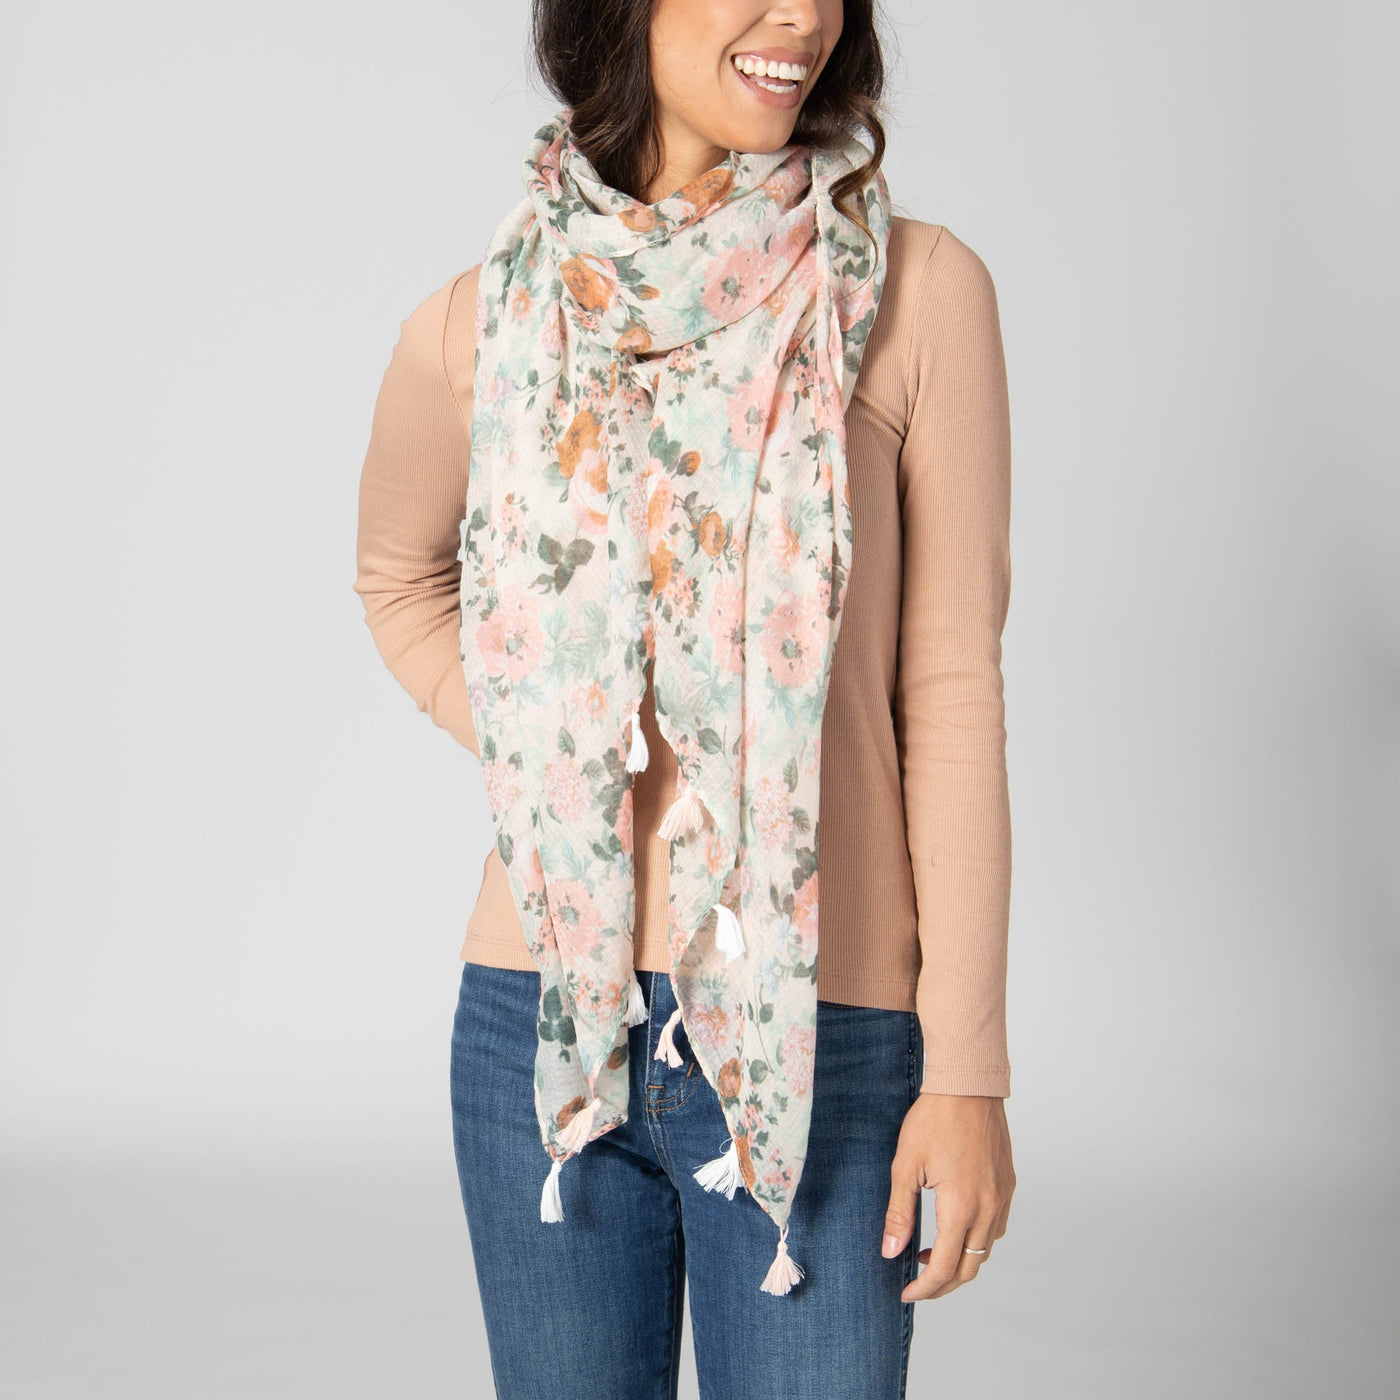 SCARF - Botanical Gardens - Light Weight Woven Soft Floral Scarf